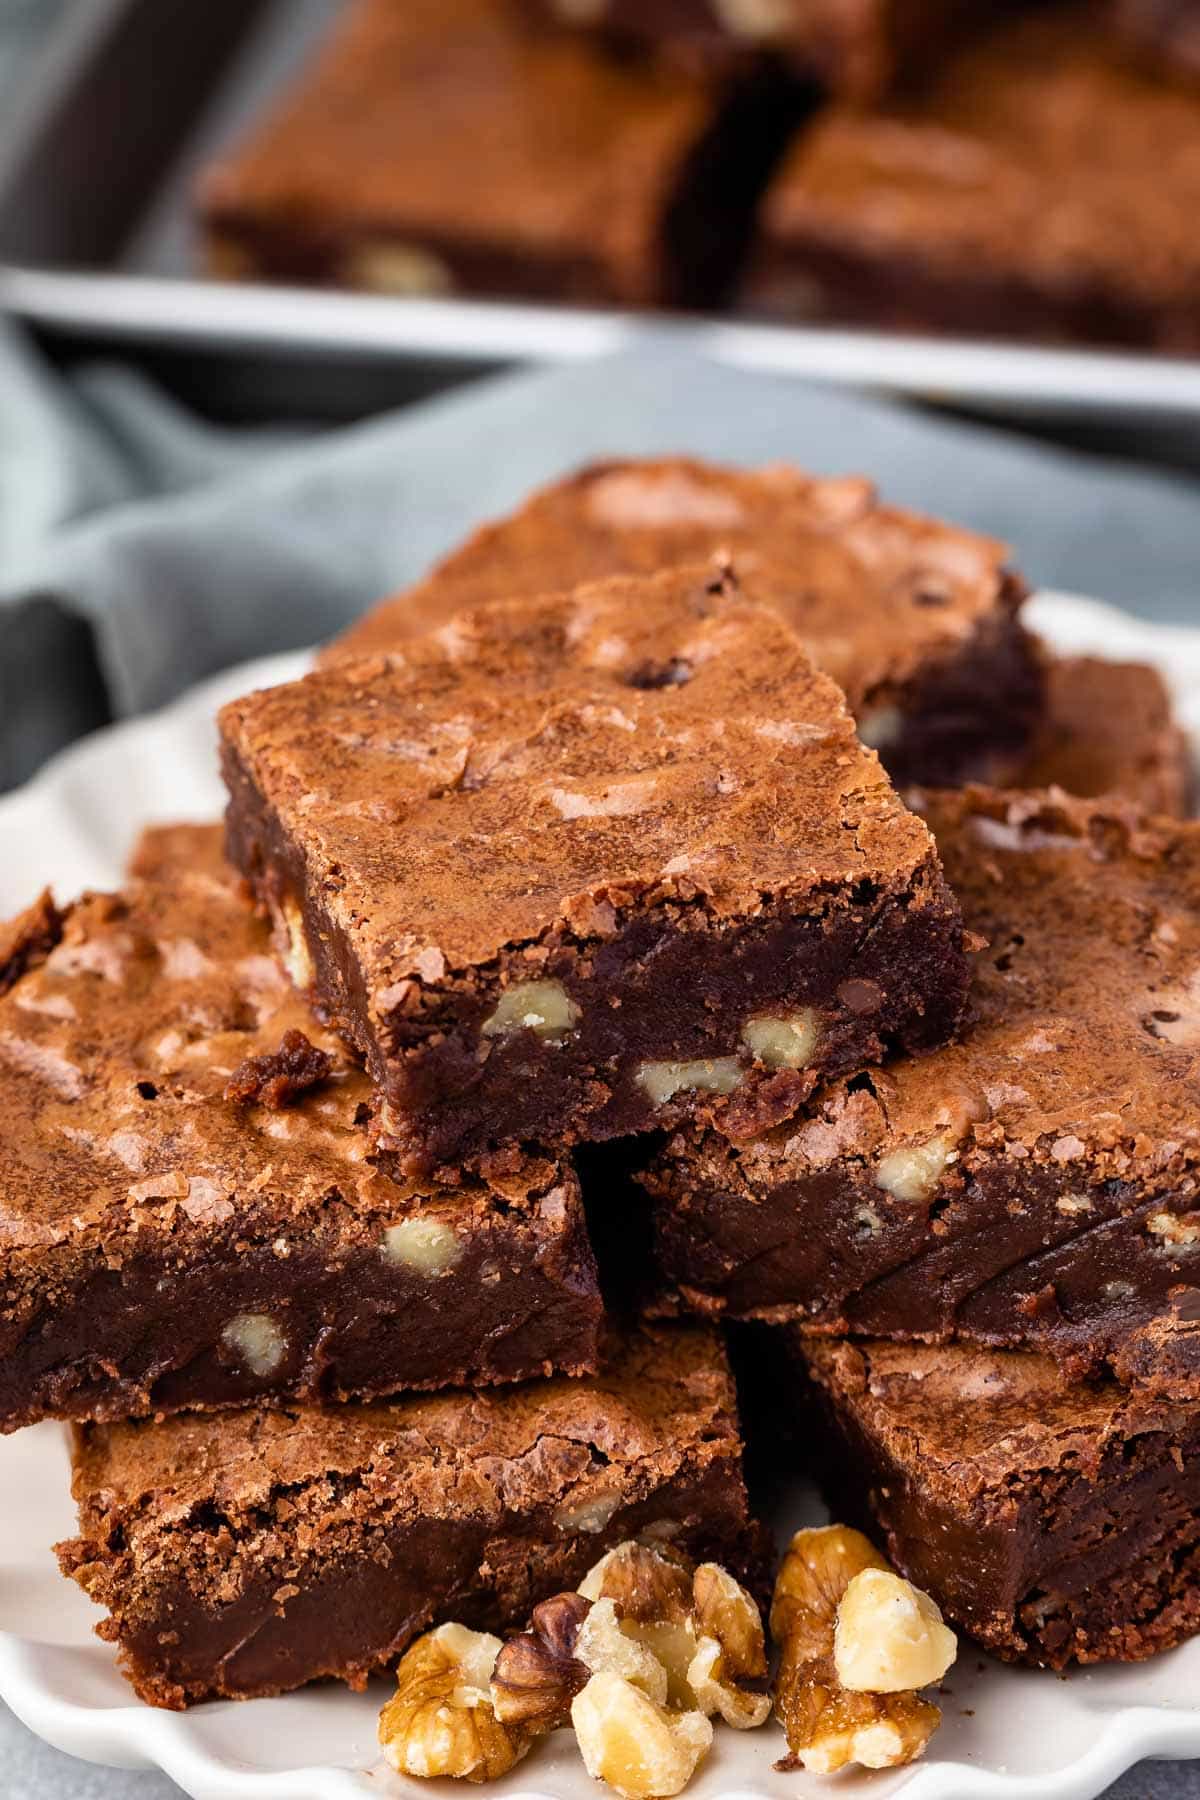 stacked brownies with walnuts baked in.